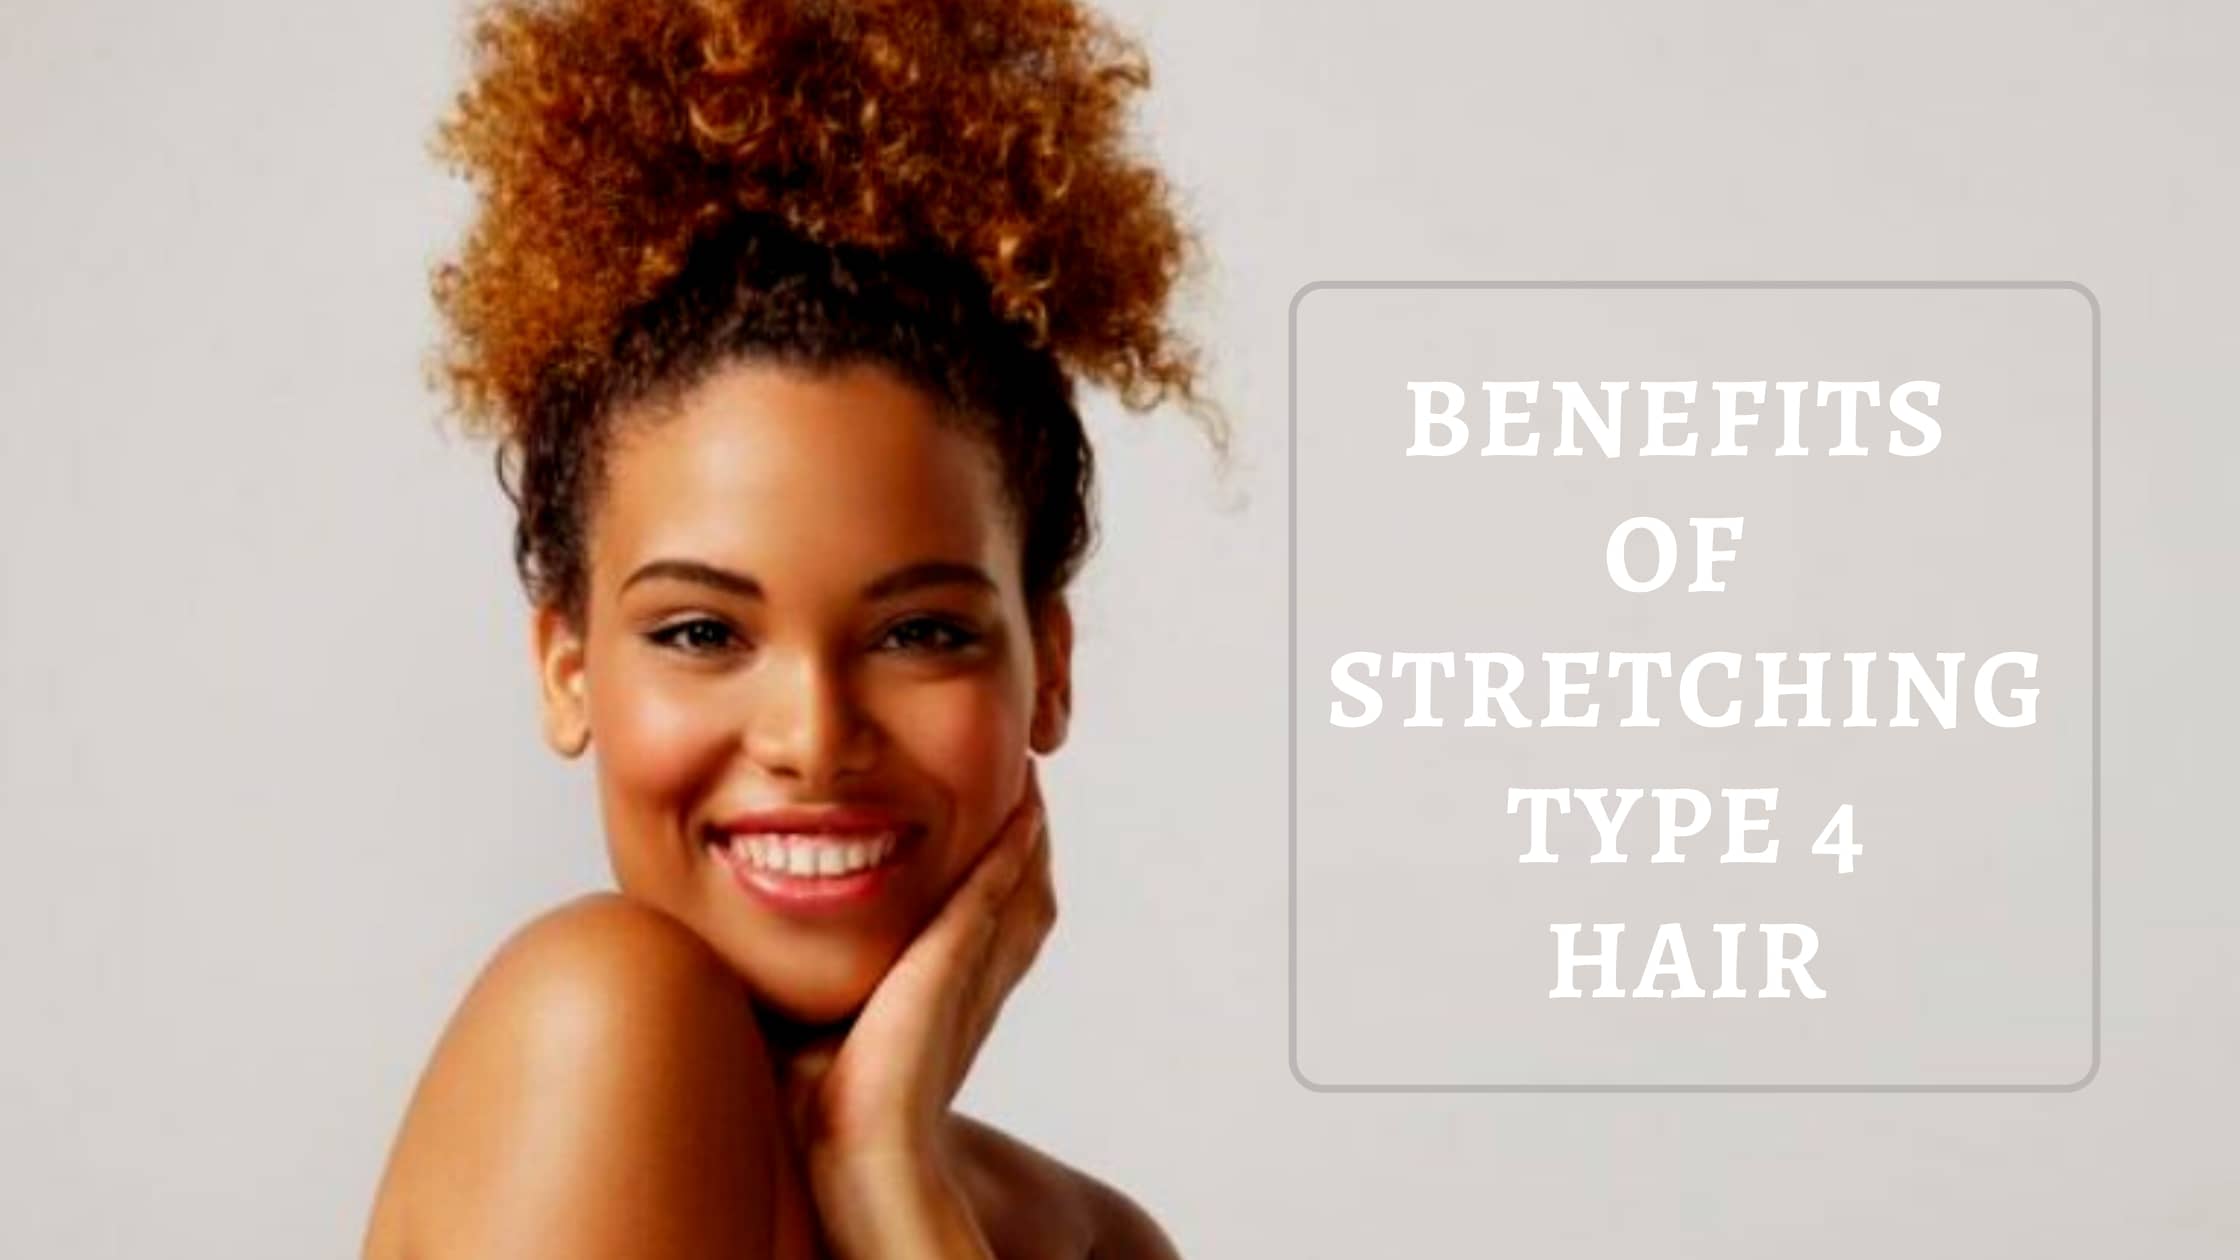 The Benefits of Stretching Type 4 Hair